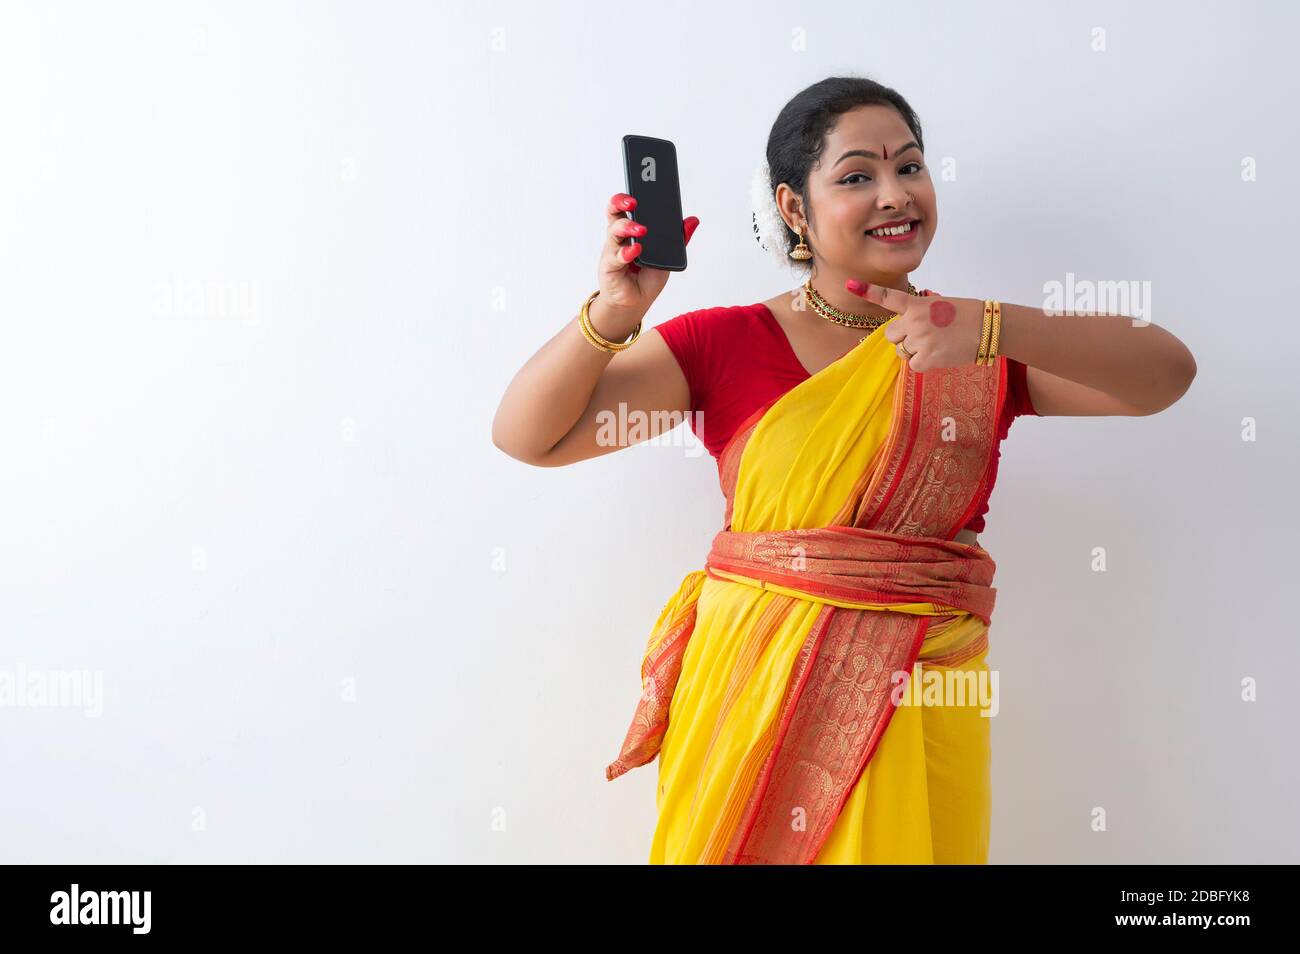 Kuchipudi dancer pointing towards the phone in her hand with a smile Stock Photo